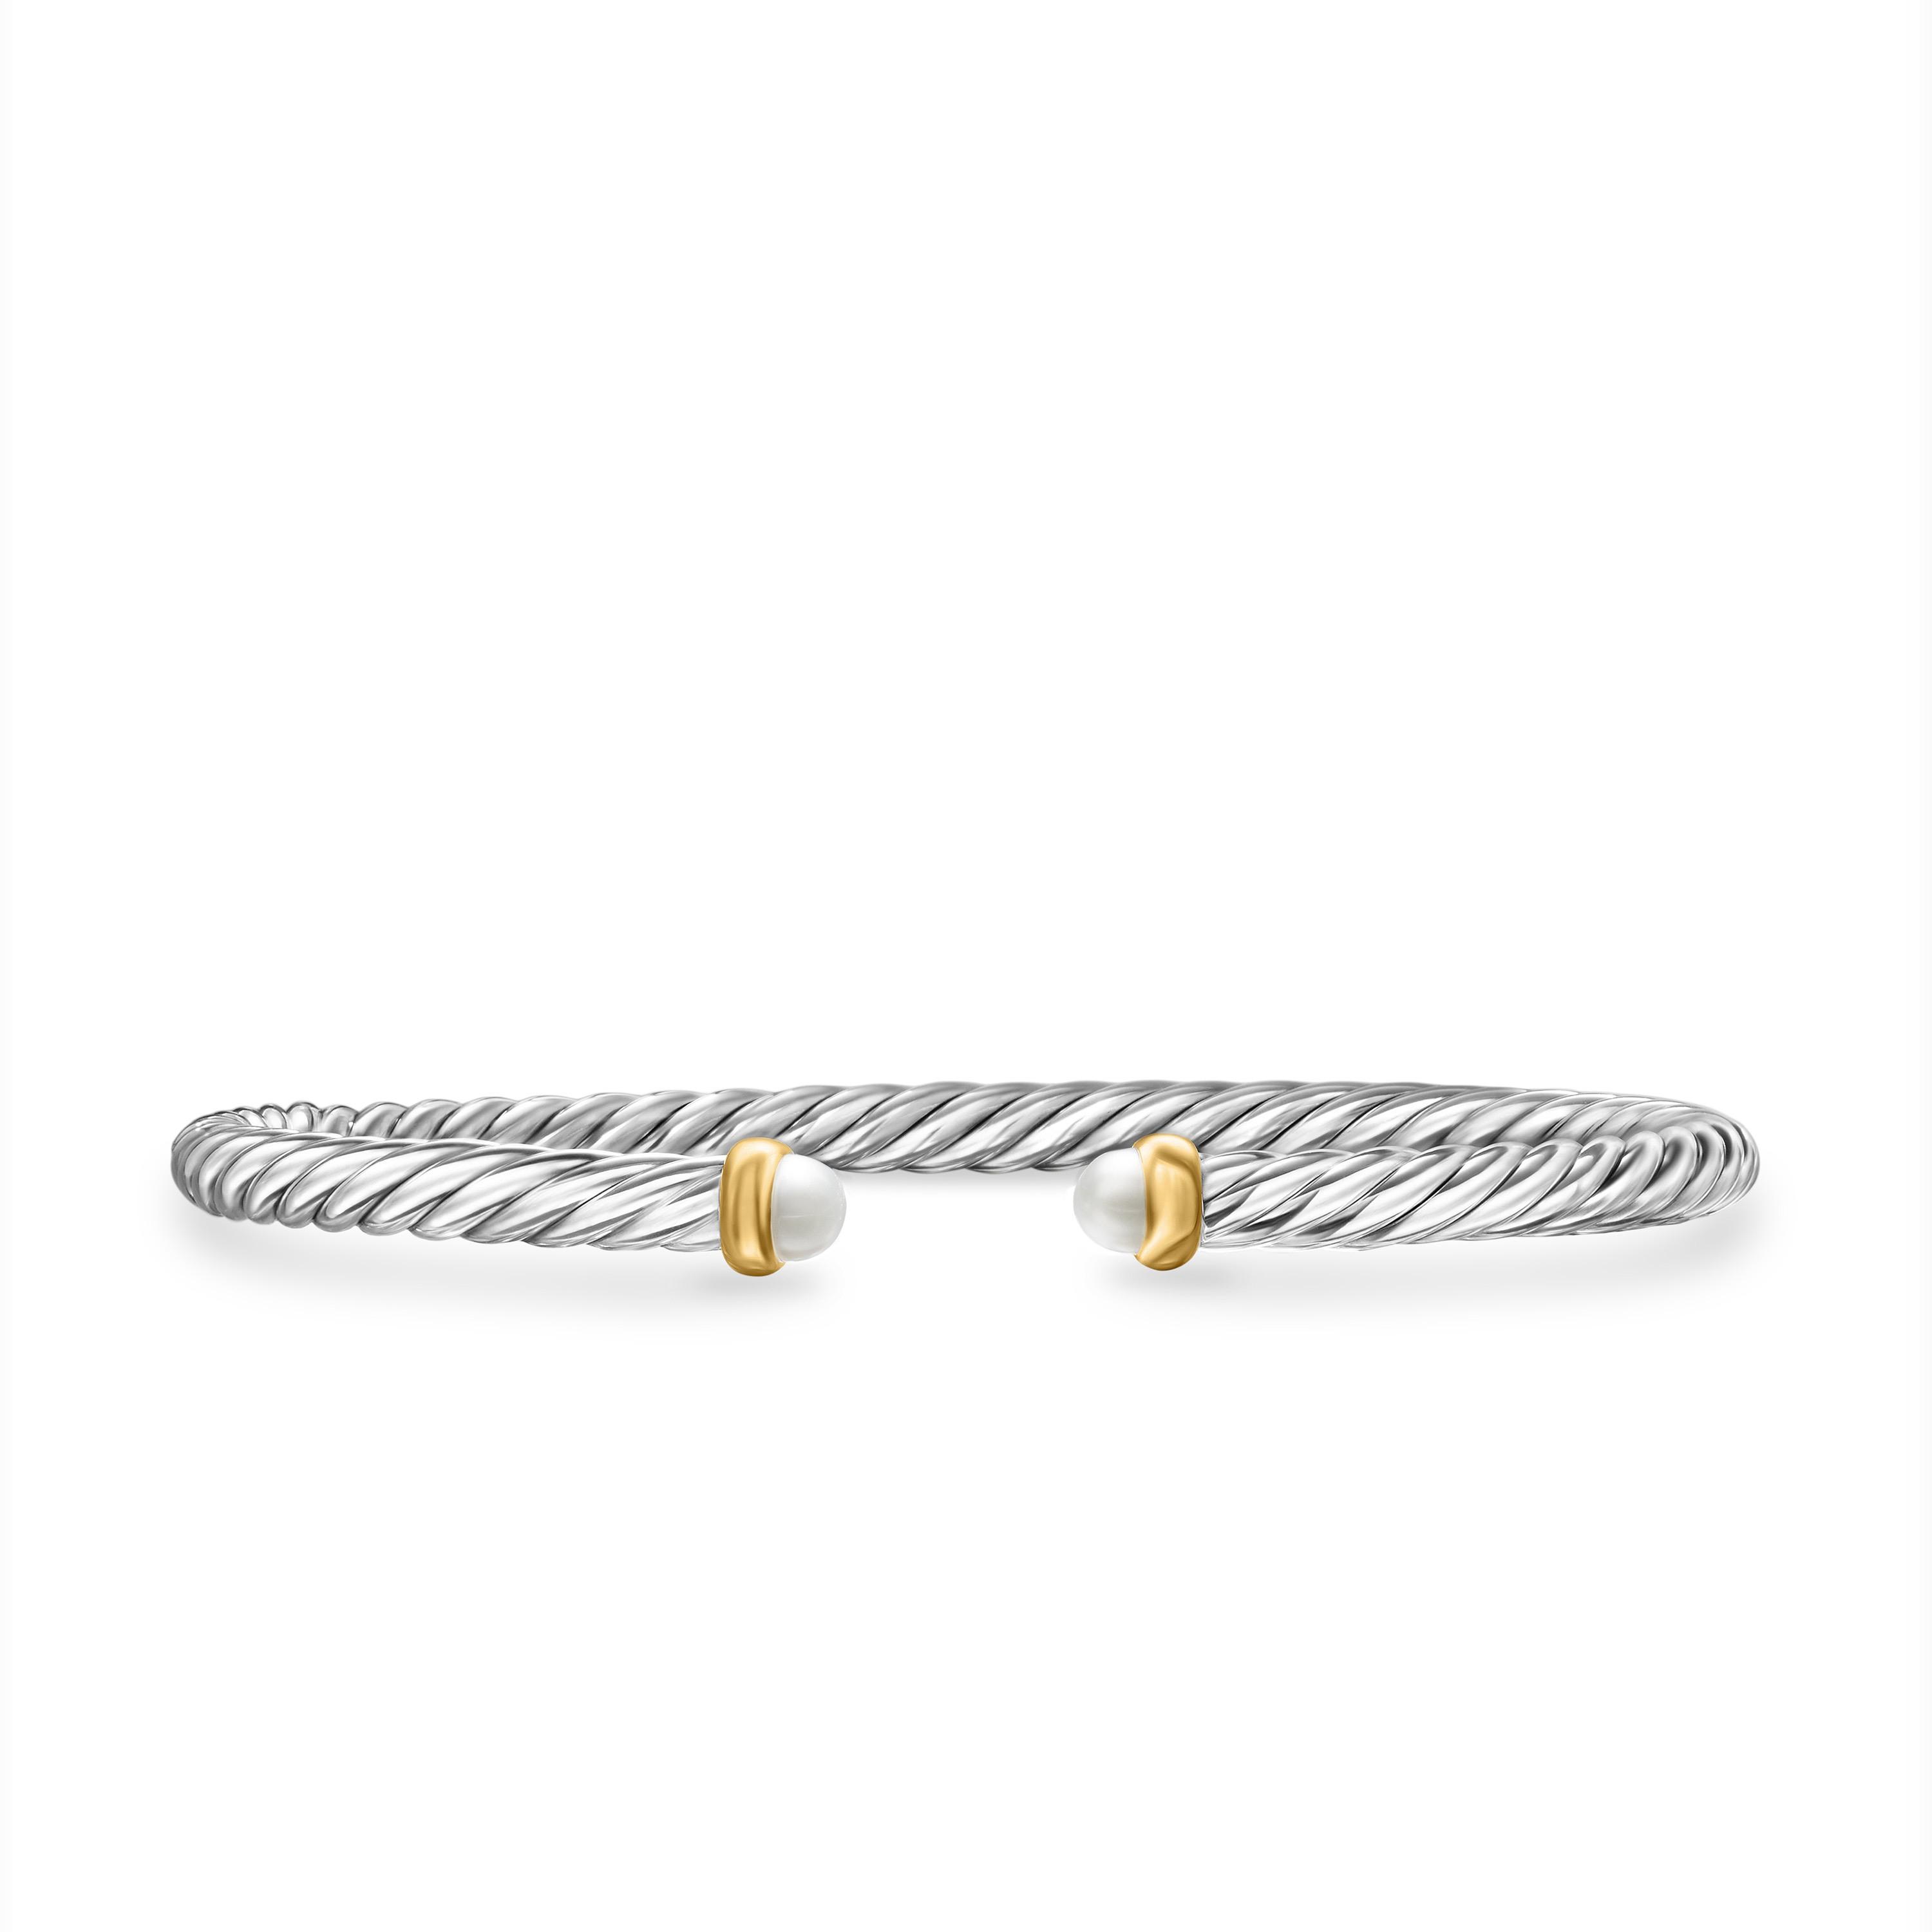 David Yurman Cable Flex Sterling Silver Bracelet with Pearl, Size Small